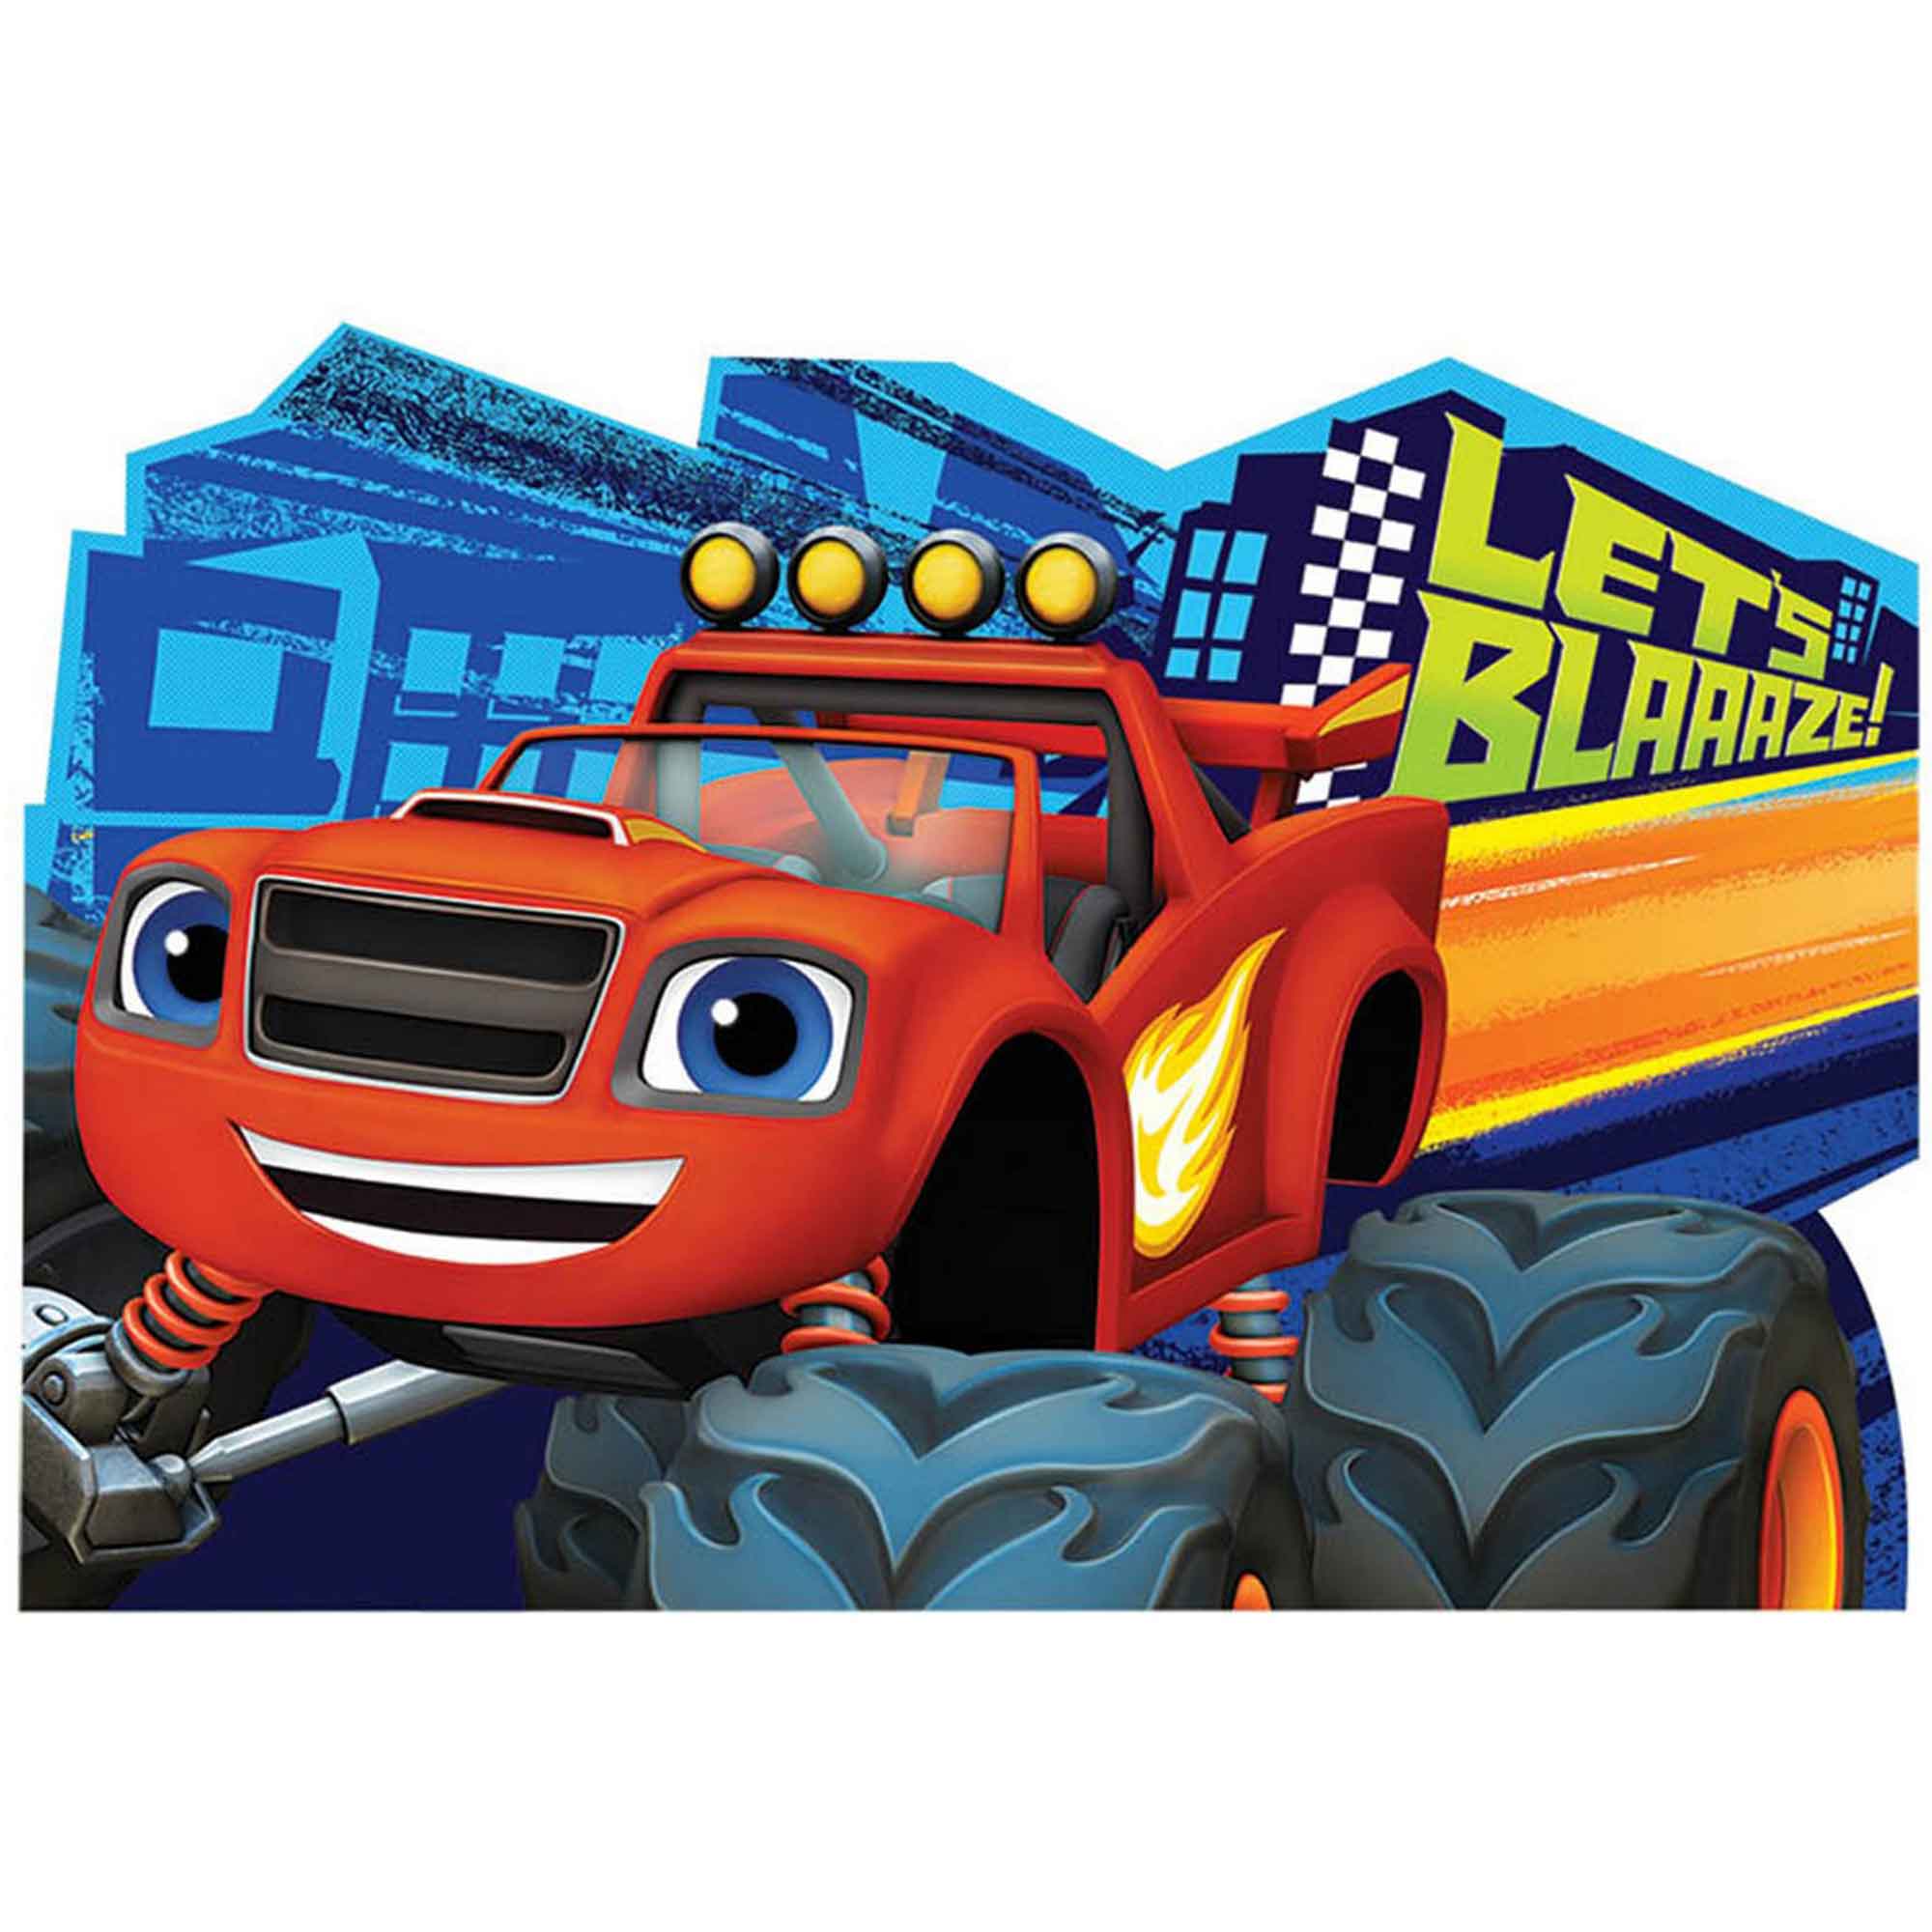 Party Empress Blaze and the Monster Machines collection is designed for young fans of the popular animated series, offering a vibrant array of products that capture the excitement and educational fun of Blaze and his friends.